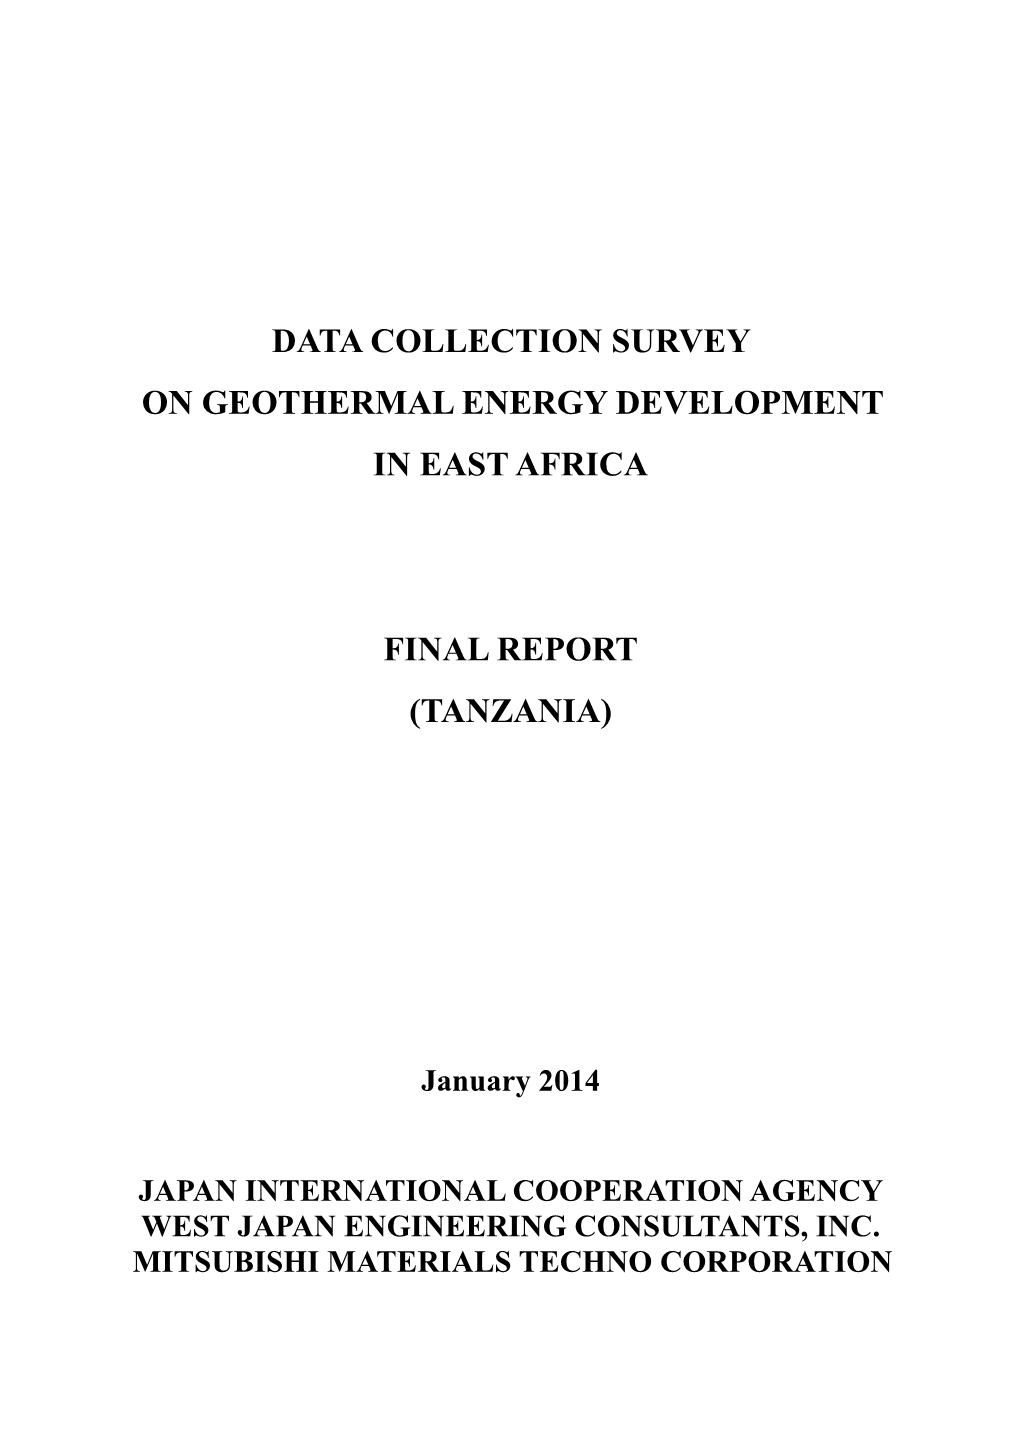 Data Collection Survey on Geothermal Energy Development in East Africa (Tanzania)